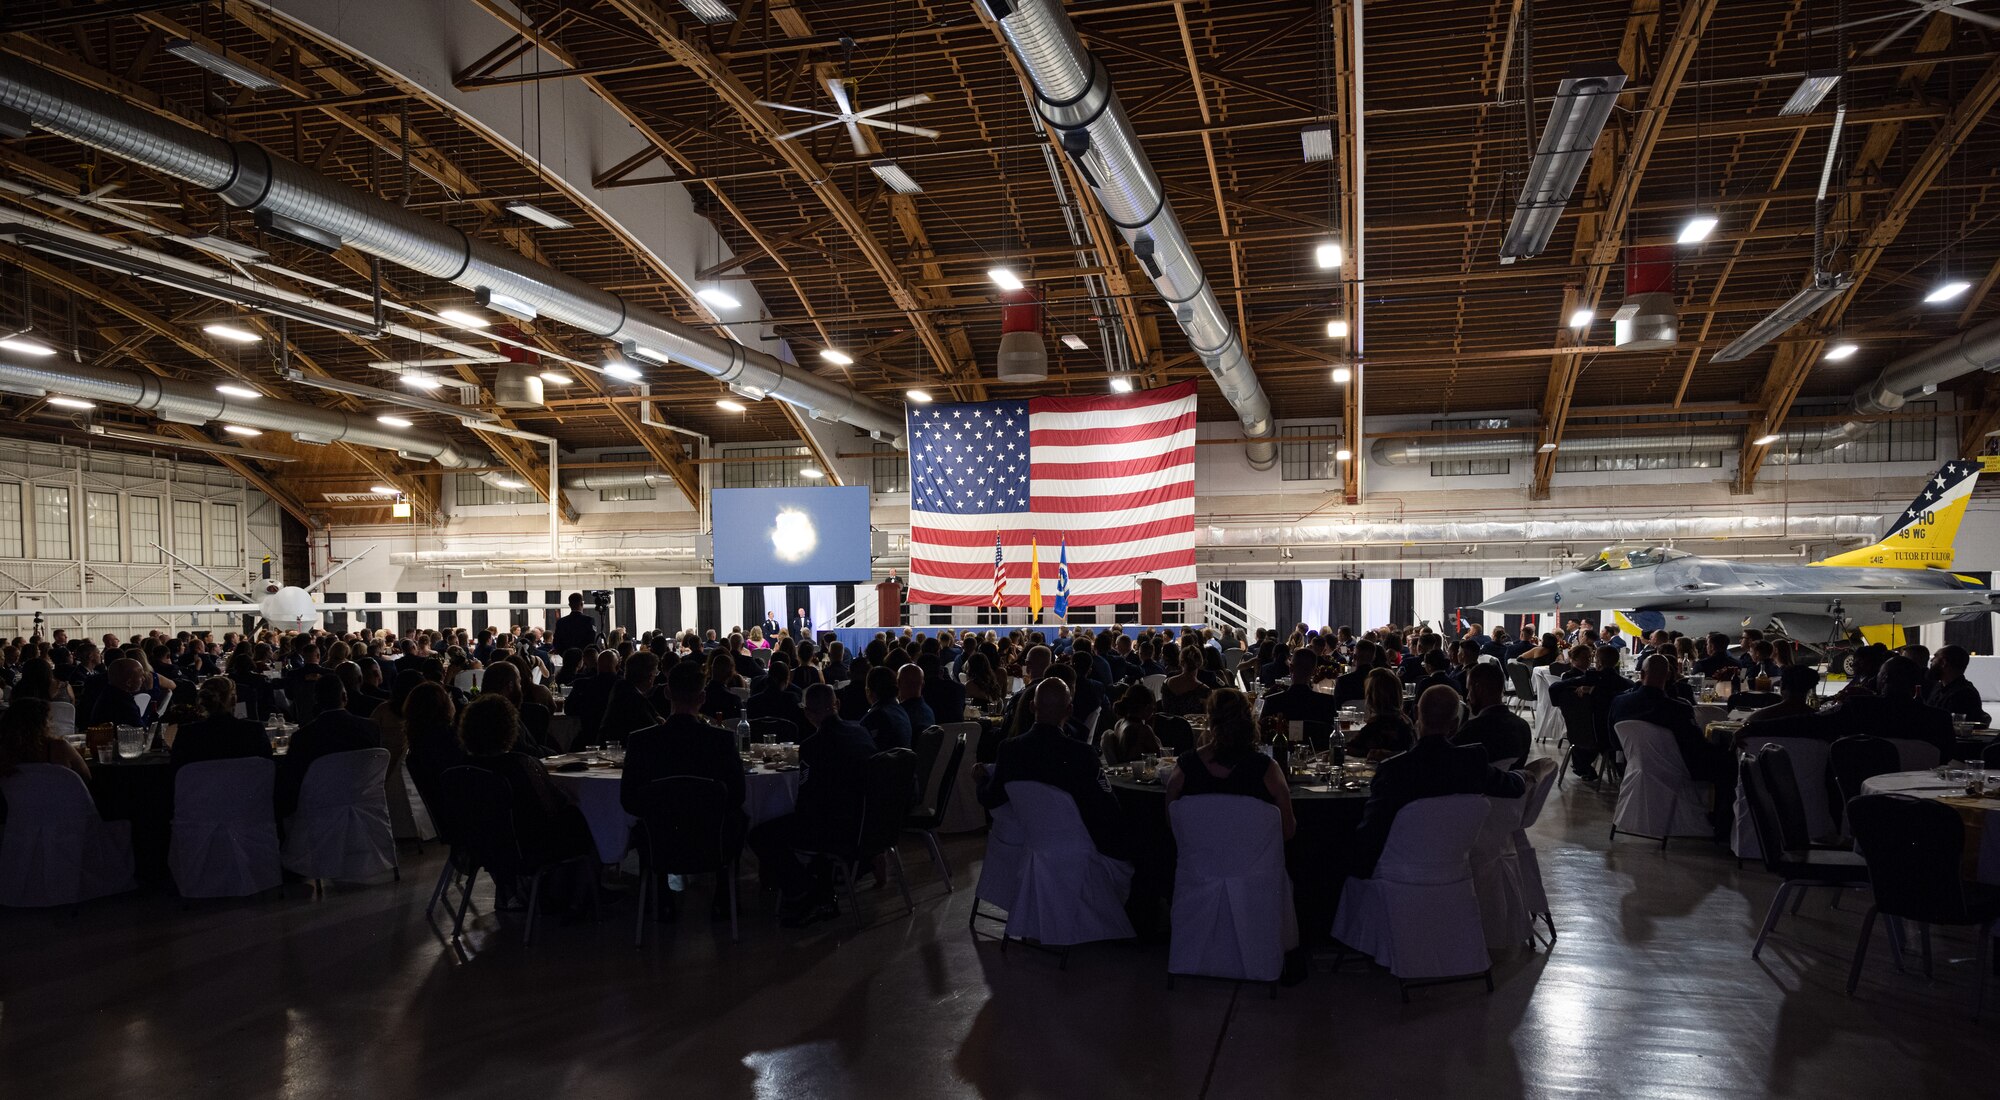 Members of the 49th Wing celebrate during the 2023 Holloman Air Force Ball at Holloman Air Force Base, New Mexico, Sept. 23, 2023. The Air Force Ball is a biennial event held at Air Force bases around the globe, bringing service members and their loved ones together to celebrate the service’s legacy. (U.S. Air Force photo by Senior Airman Antonio Salfran)